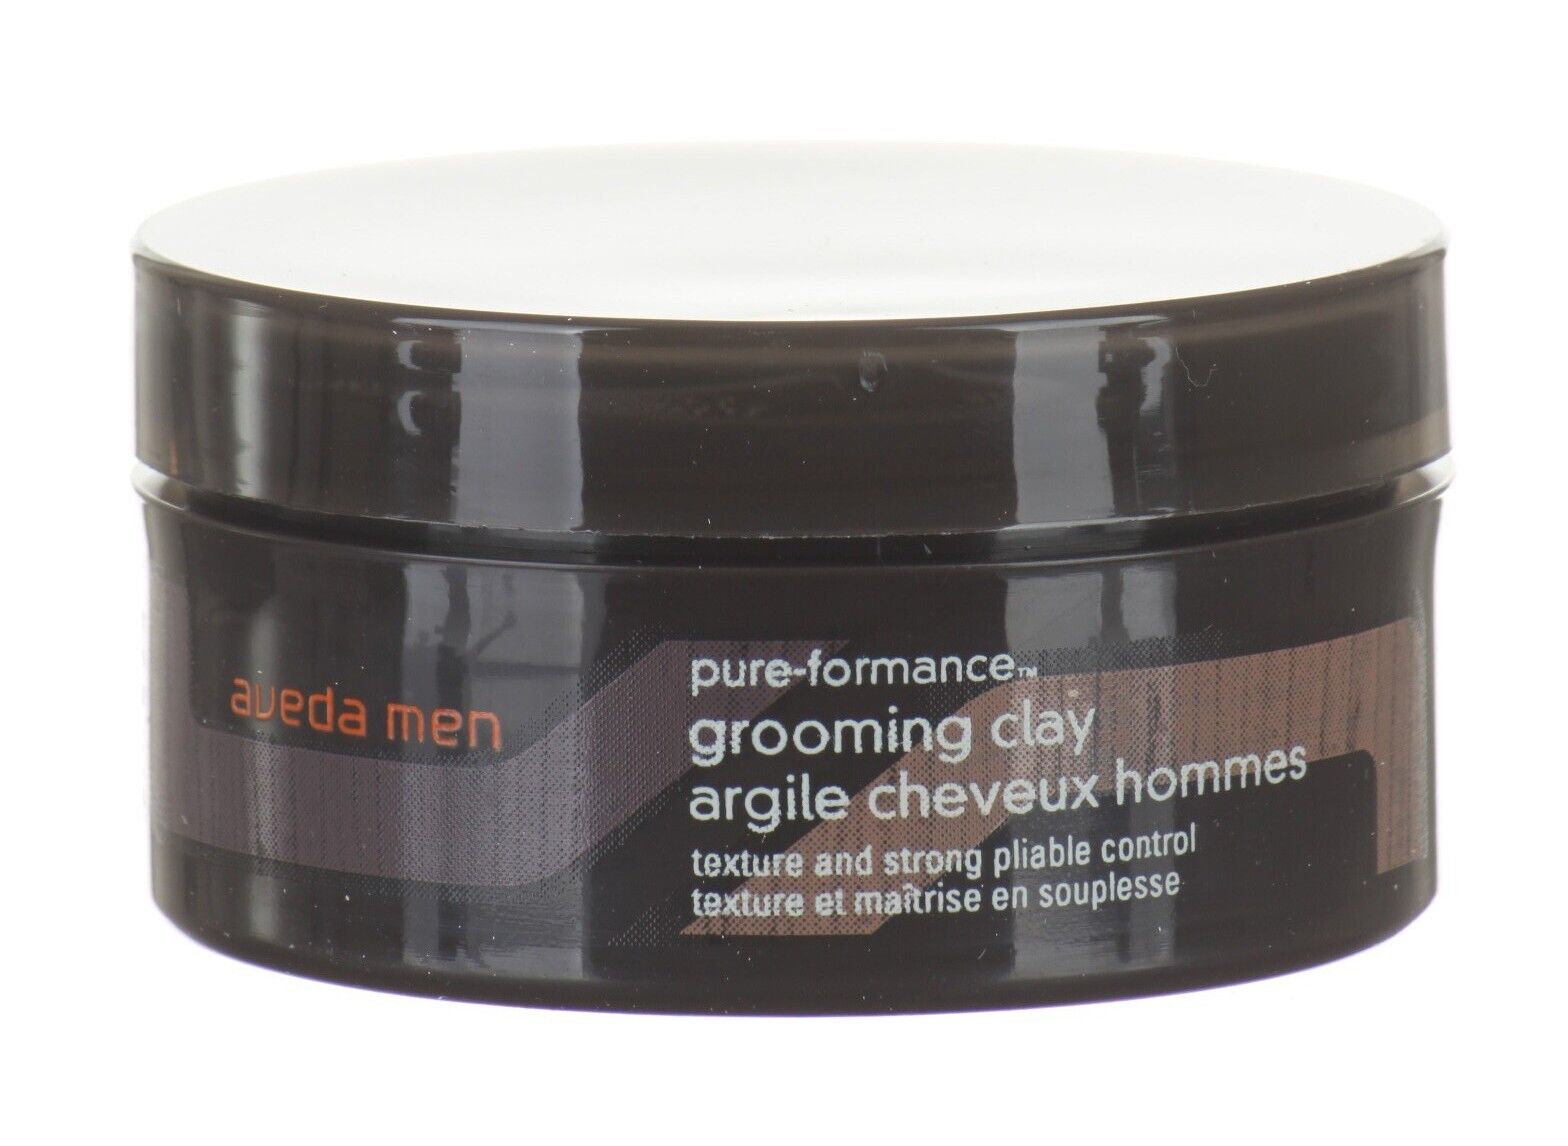 Aveda Men Pure-Formance Grooming Clay 2.6 oz